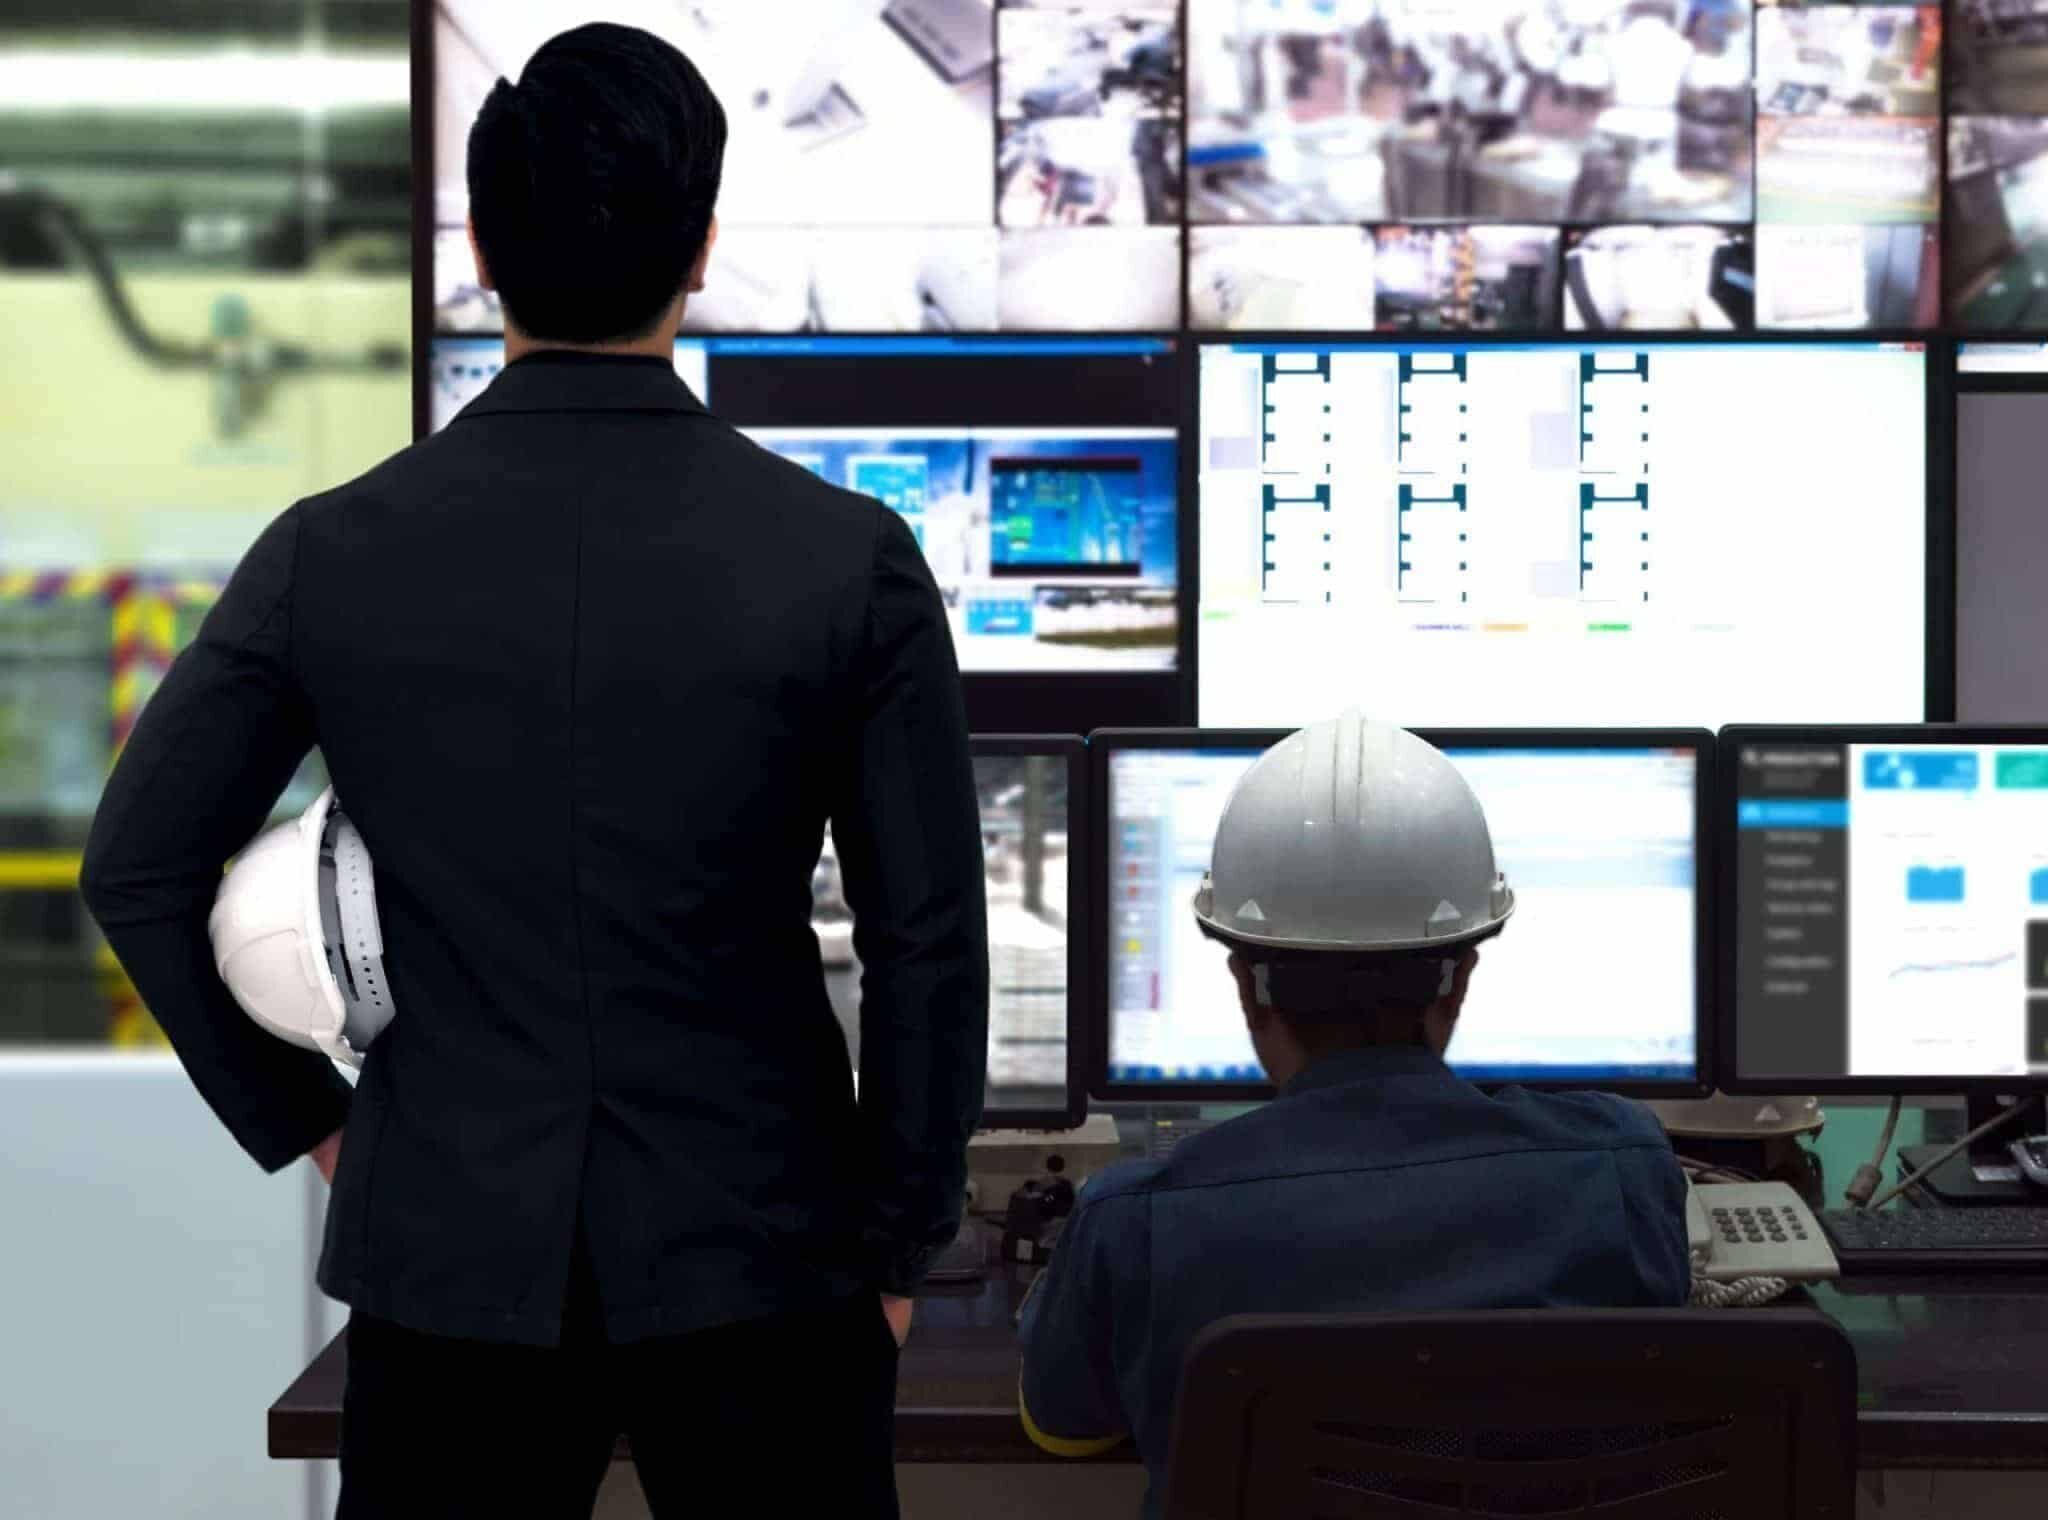 Process Control room and Industrial Automation in industry 4.0 technology trend concept. Engineer and director manager monitoring real time work automation machine process in smart factory.